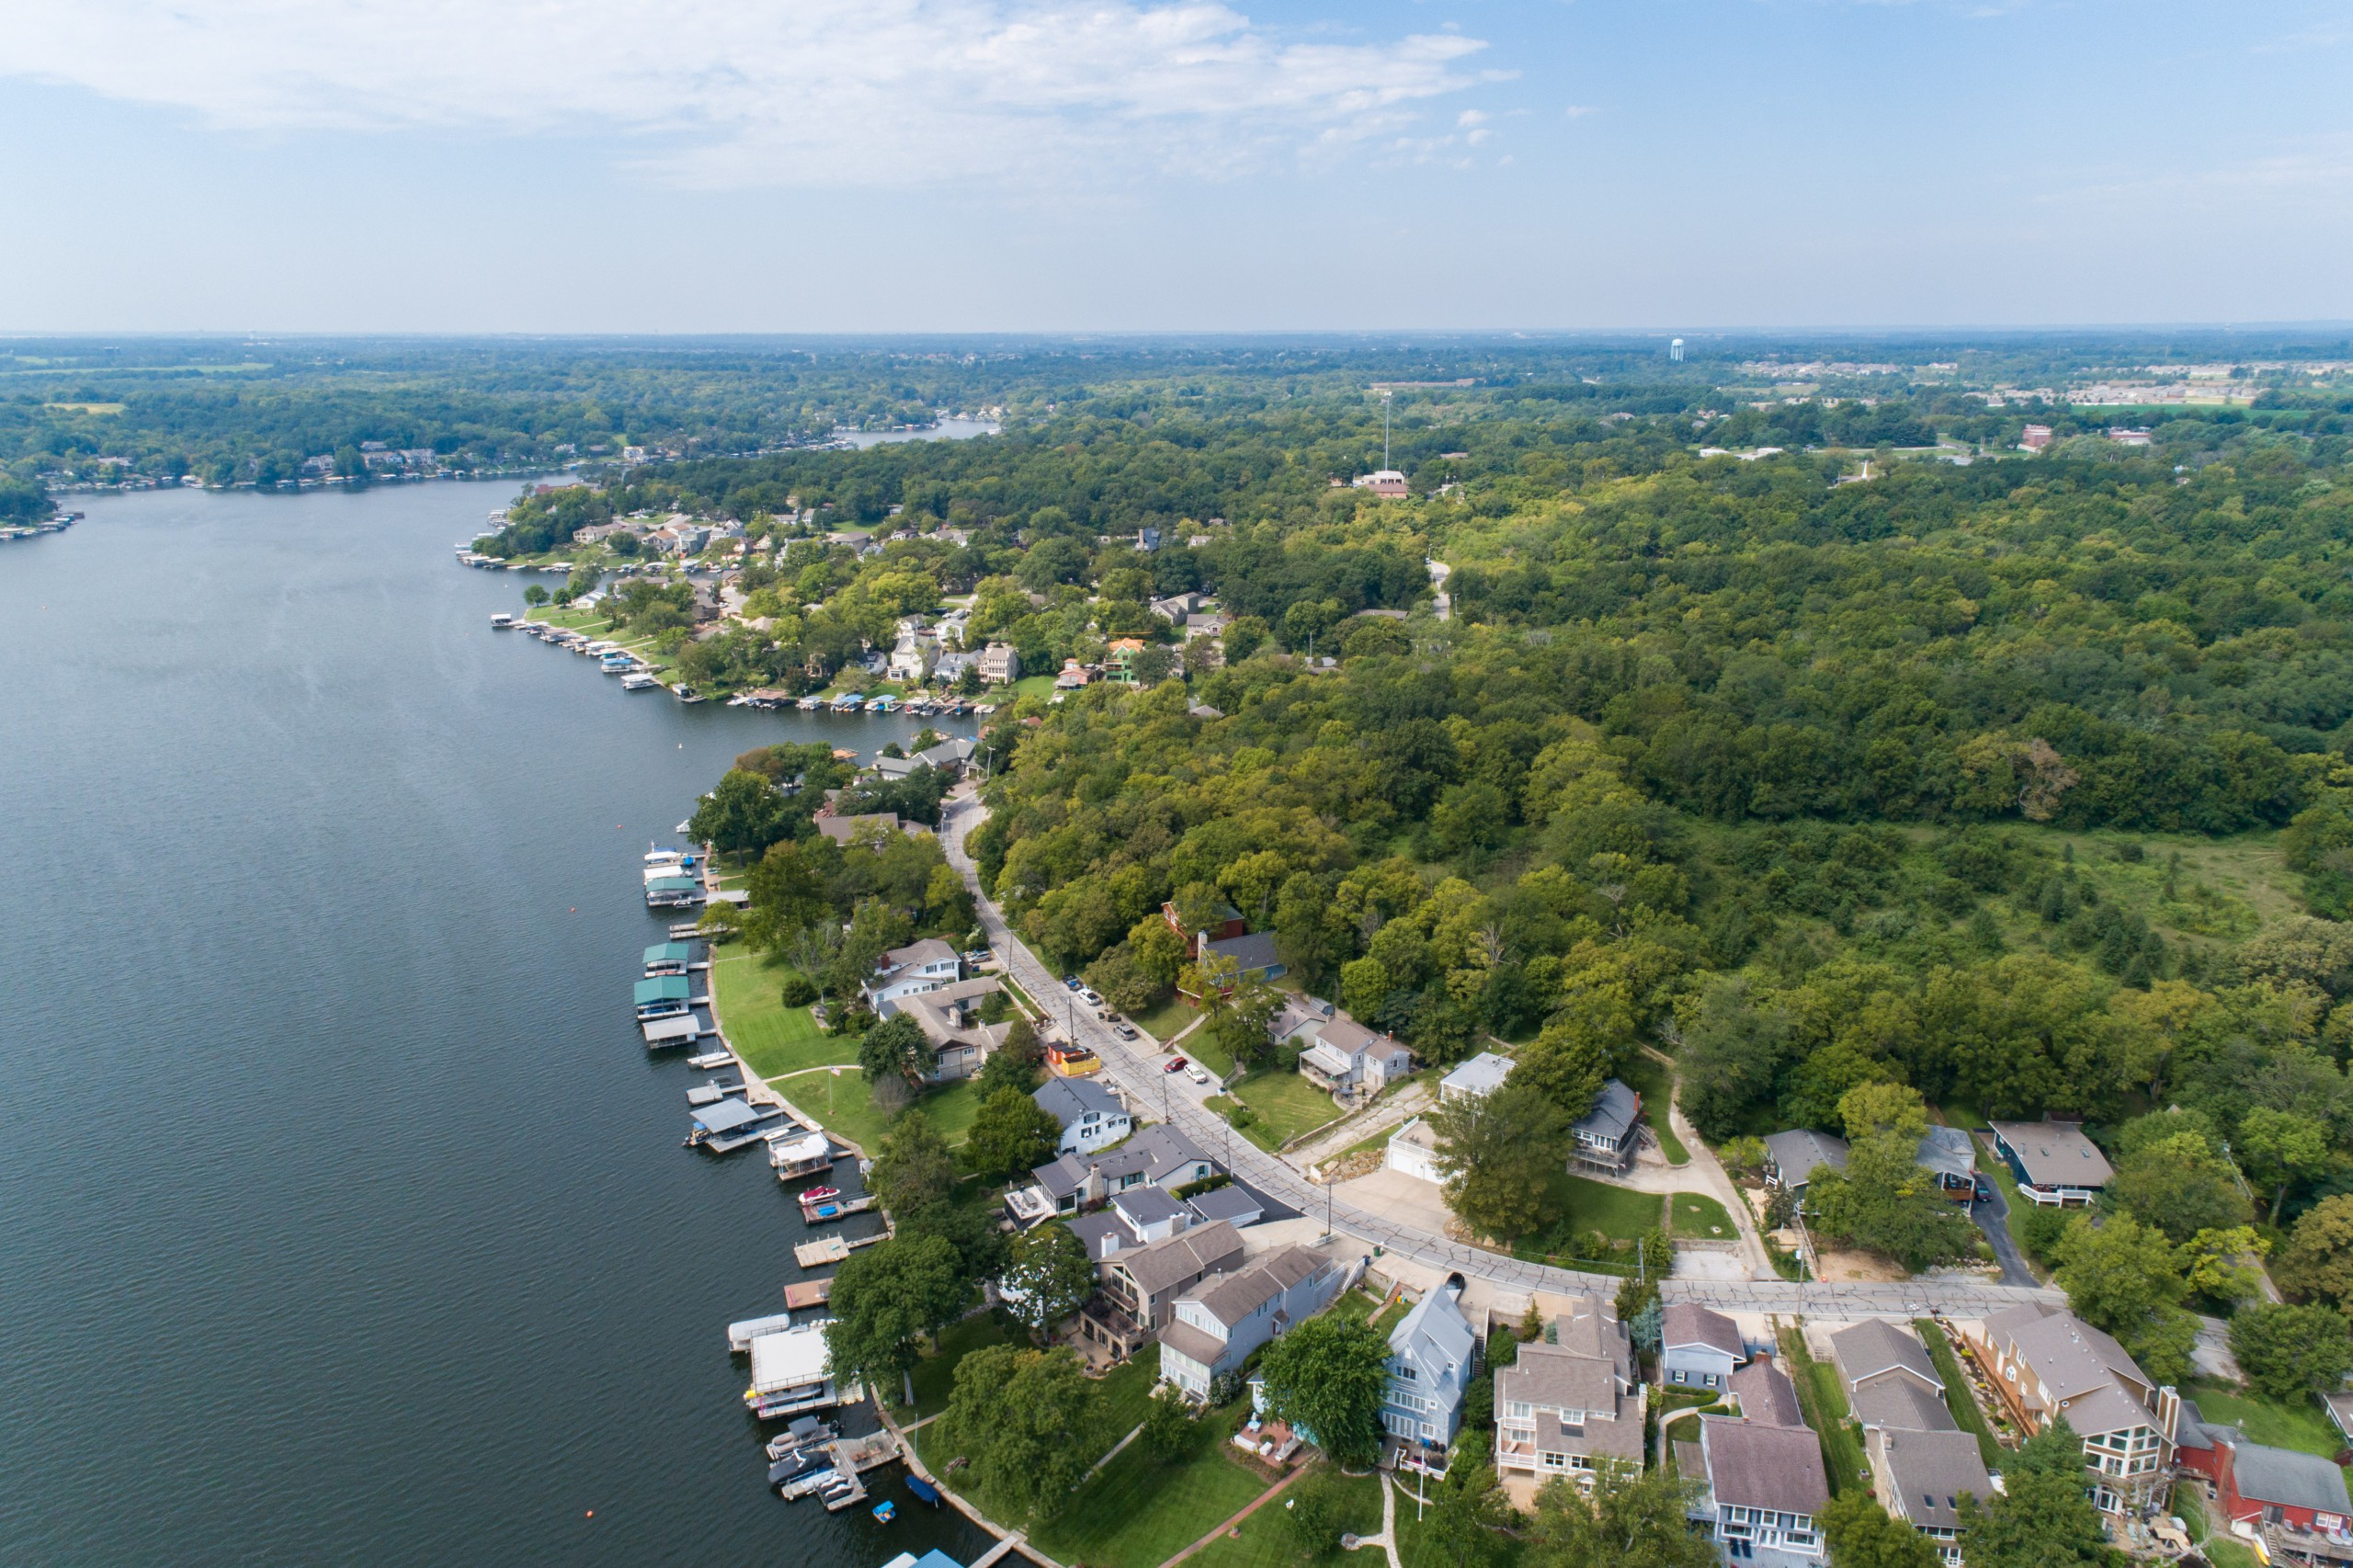 Aerial View of Lake with homes, docks and boats